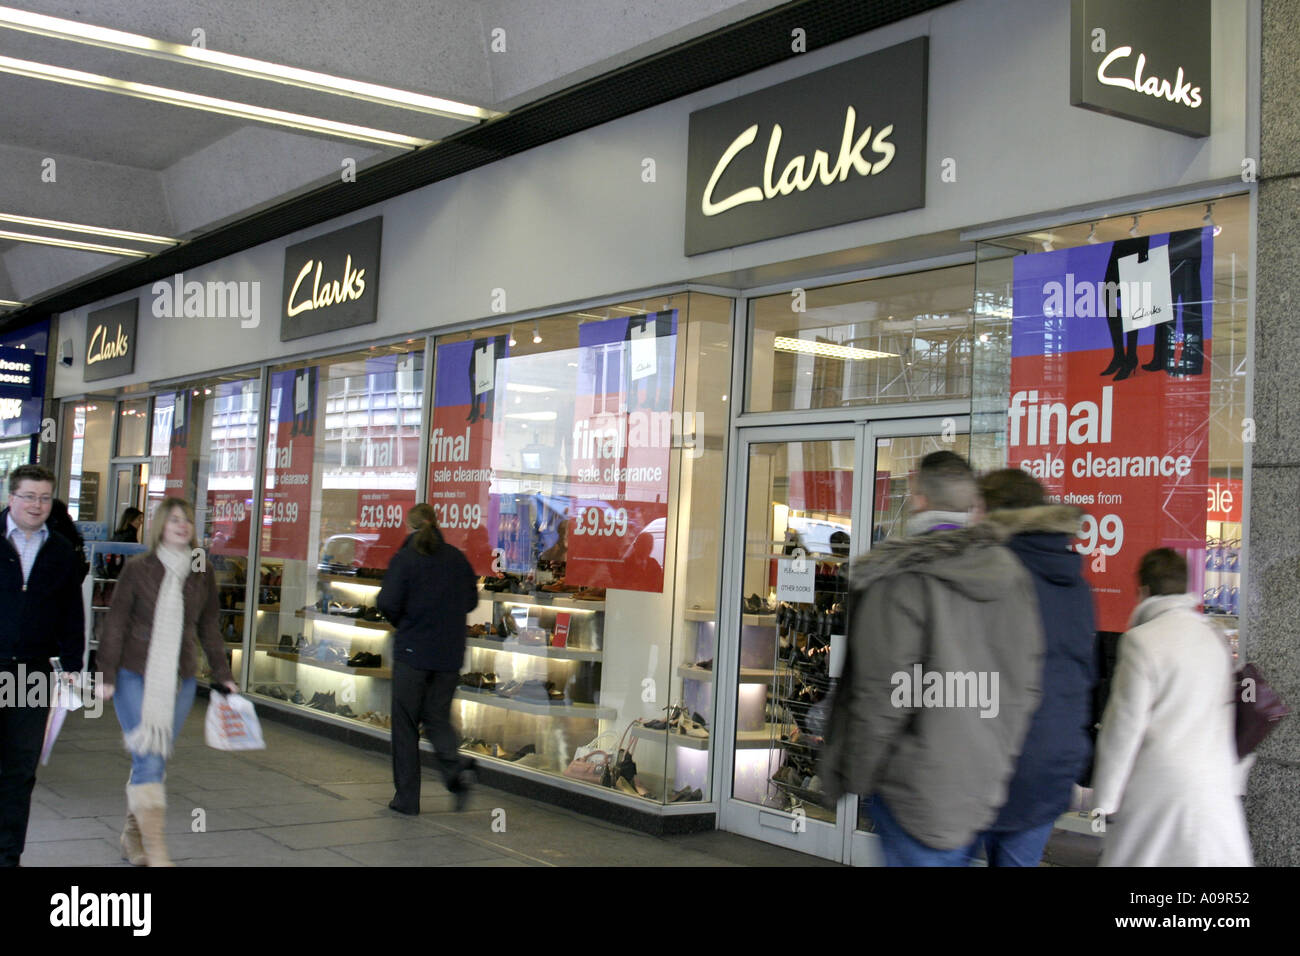 clarks clearance outlet london